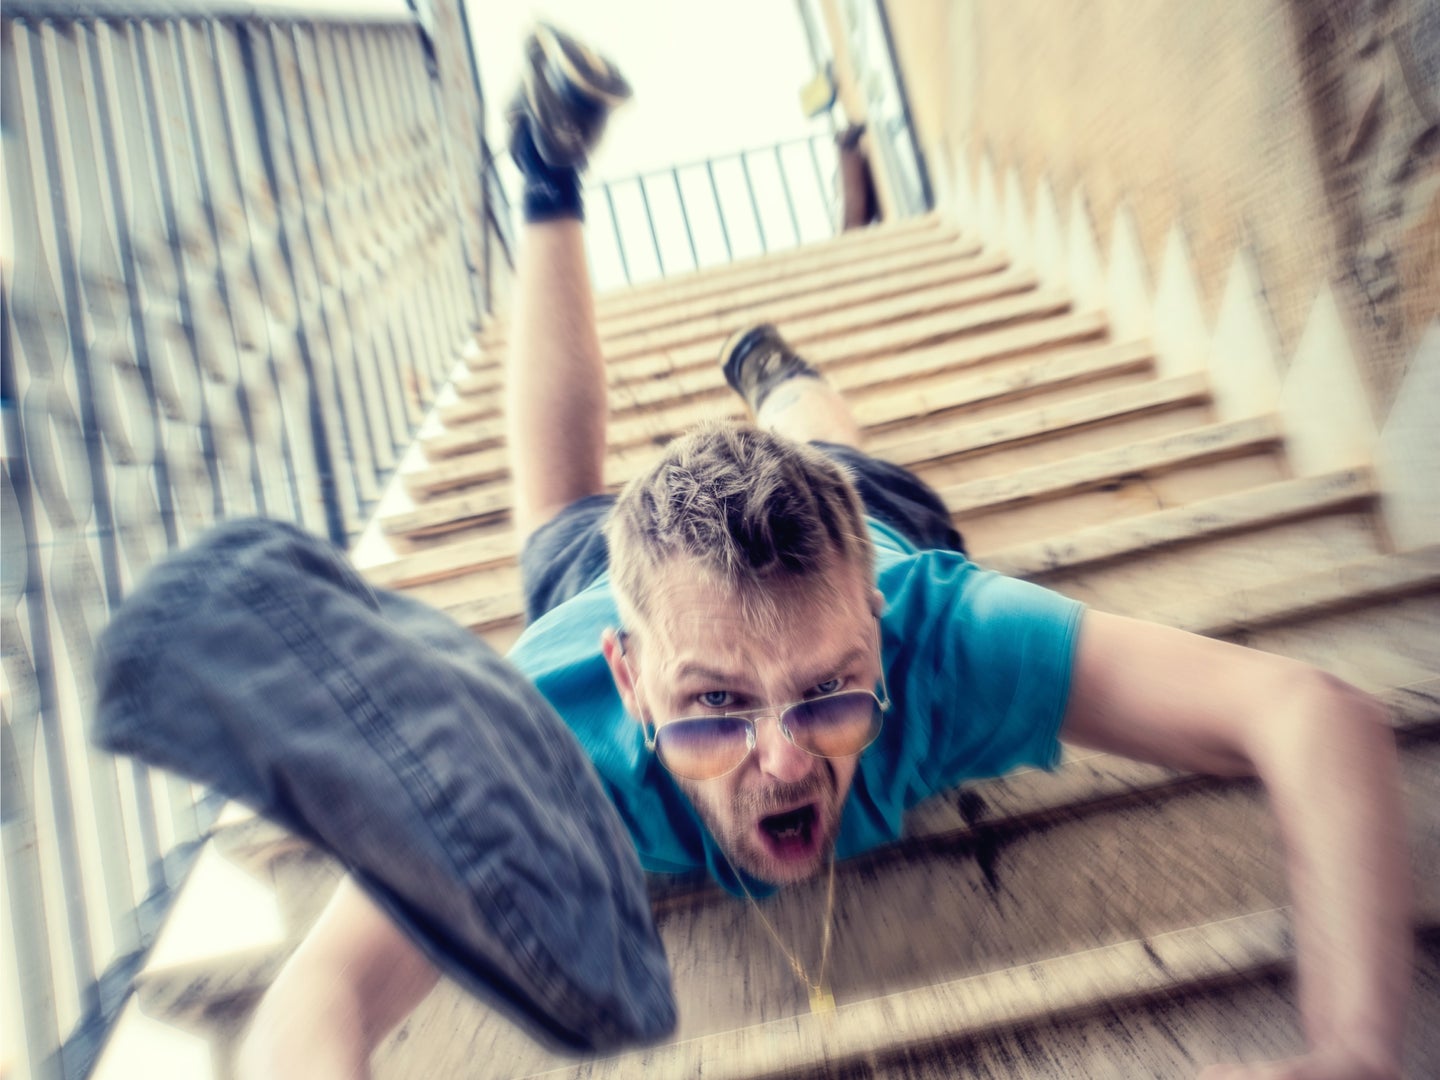 A man wearing sunglasses, a blue t-shirt, and shorts falling face-first down some concrete exterior stairs, while dropping a pair of jeans.